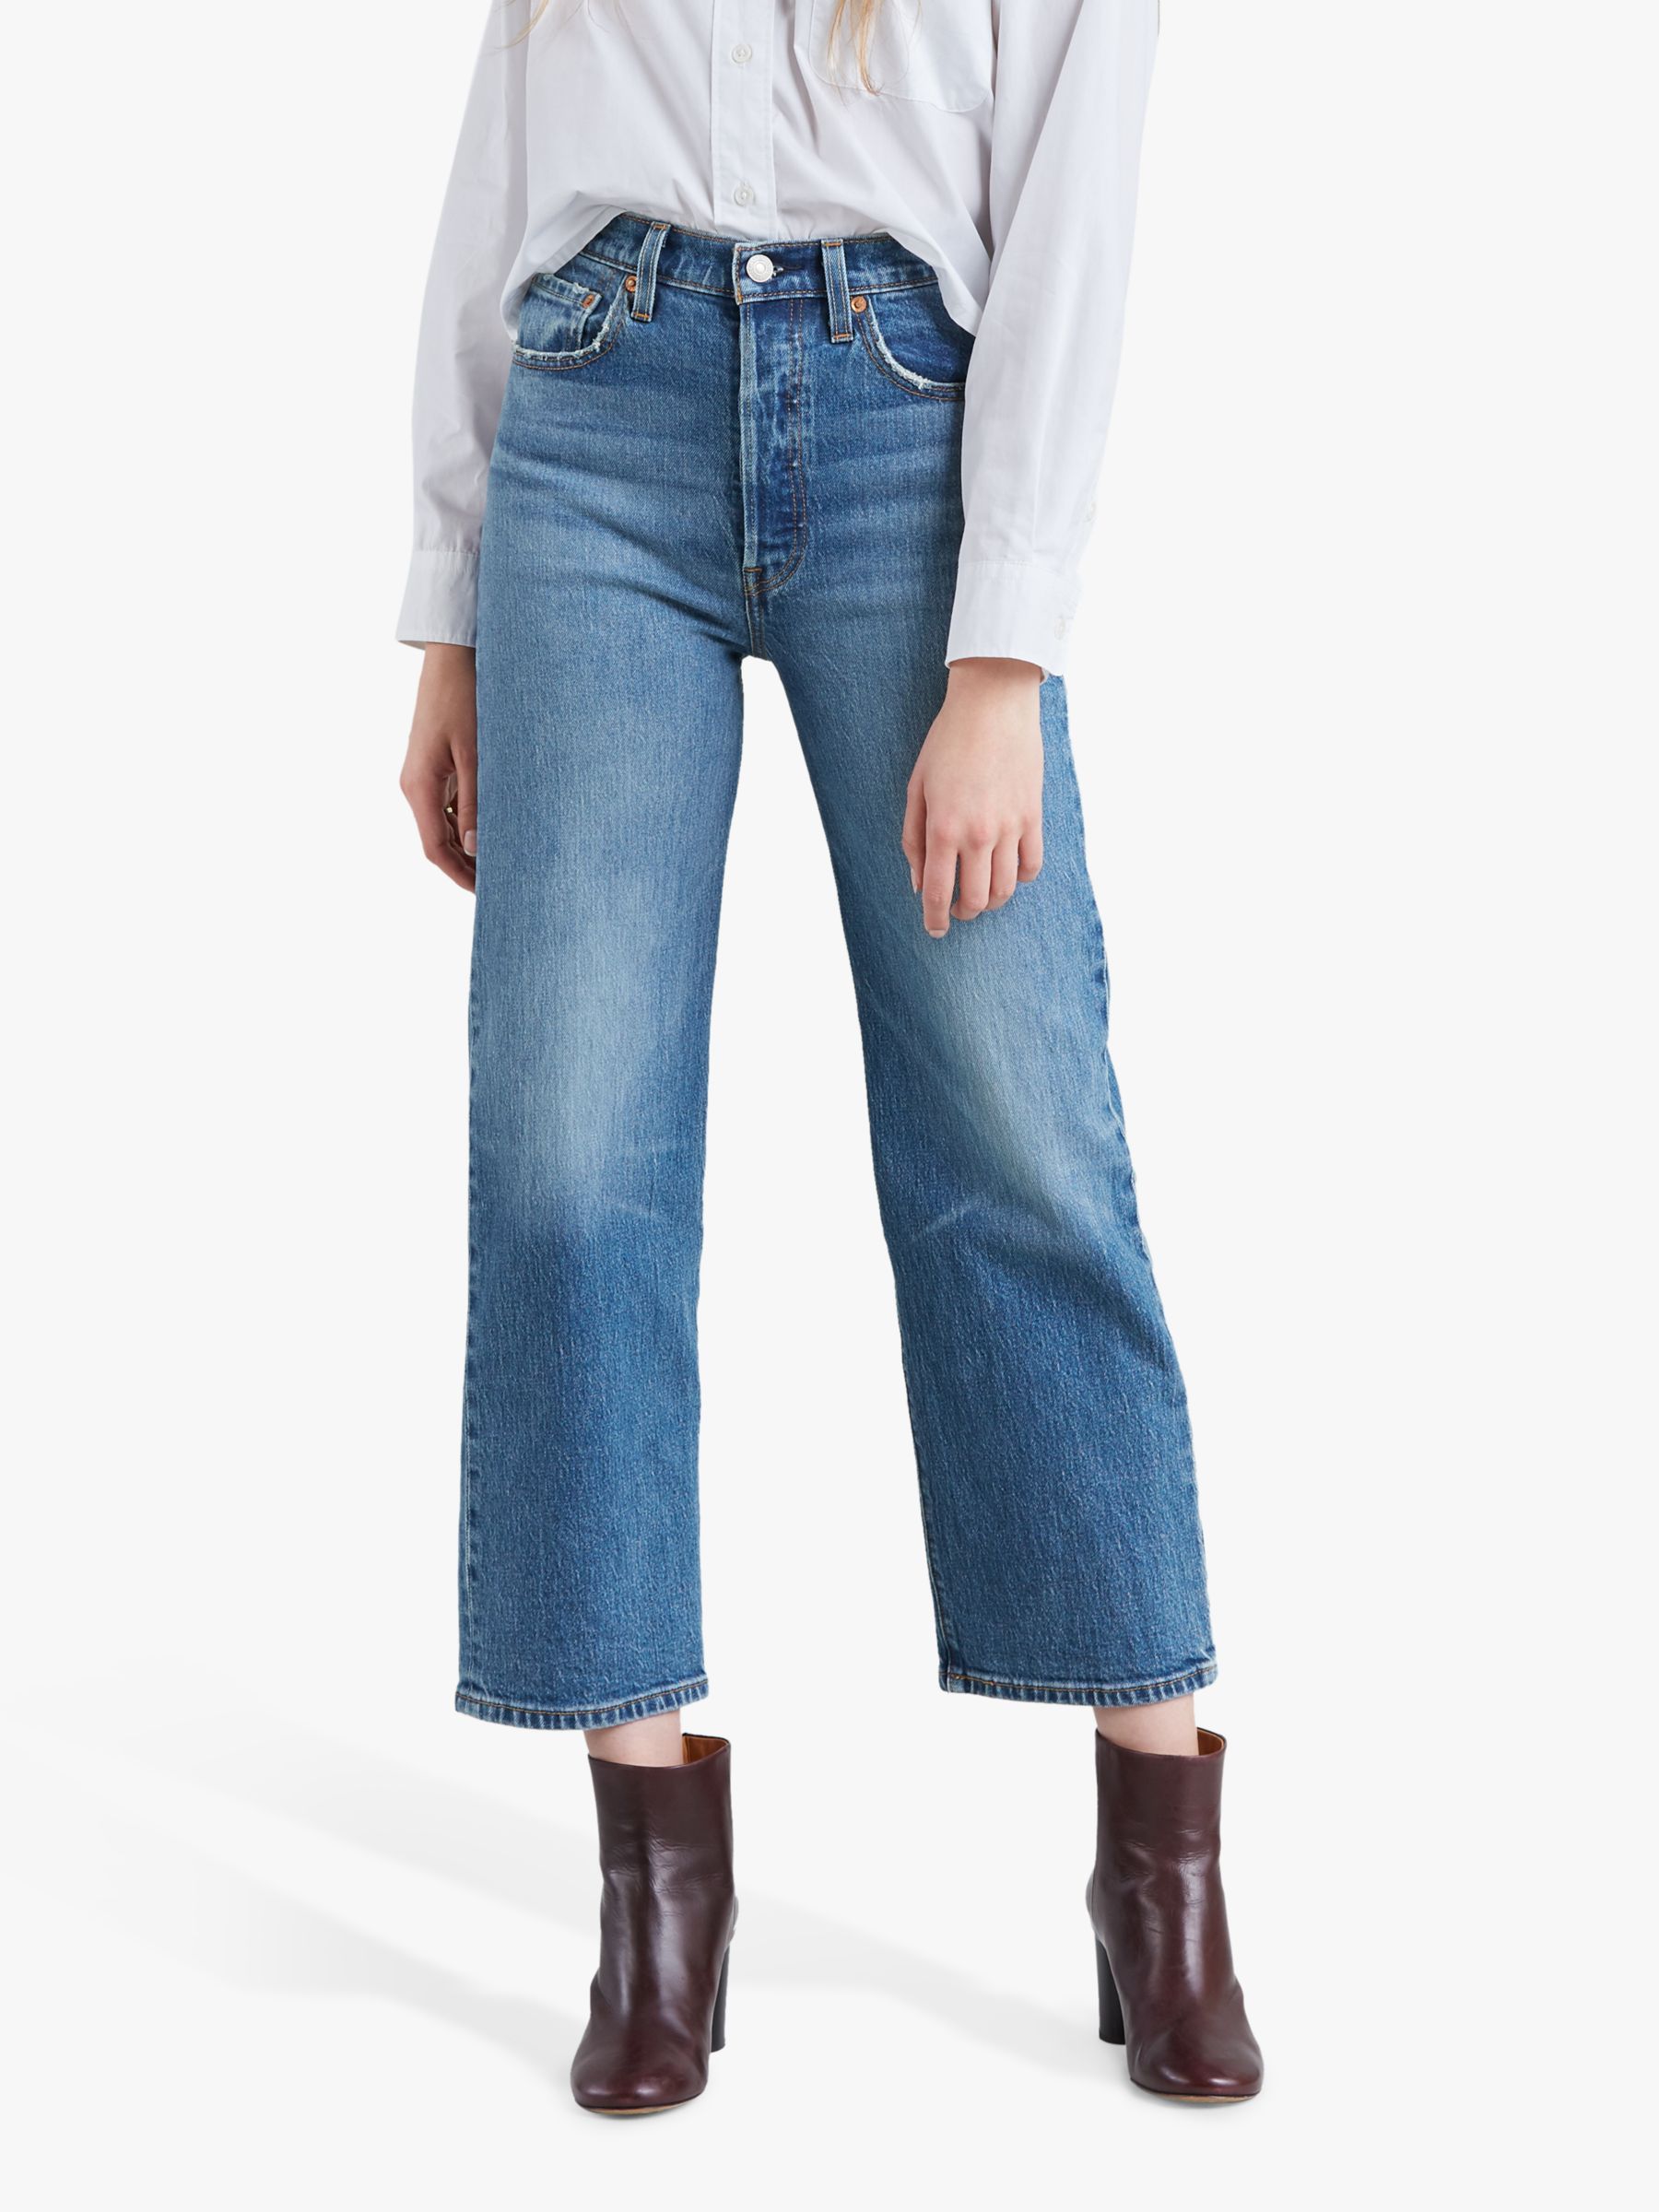 Levi's Ribcage Straight Ankle Jeans, Jive Swing